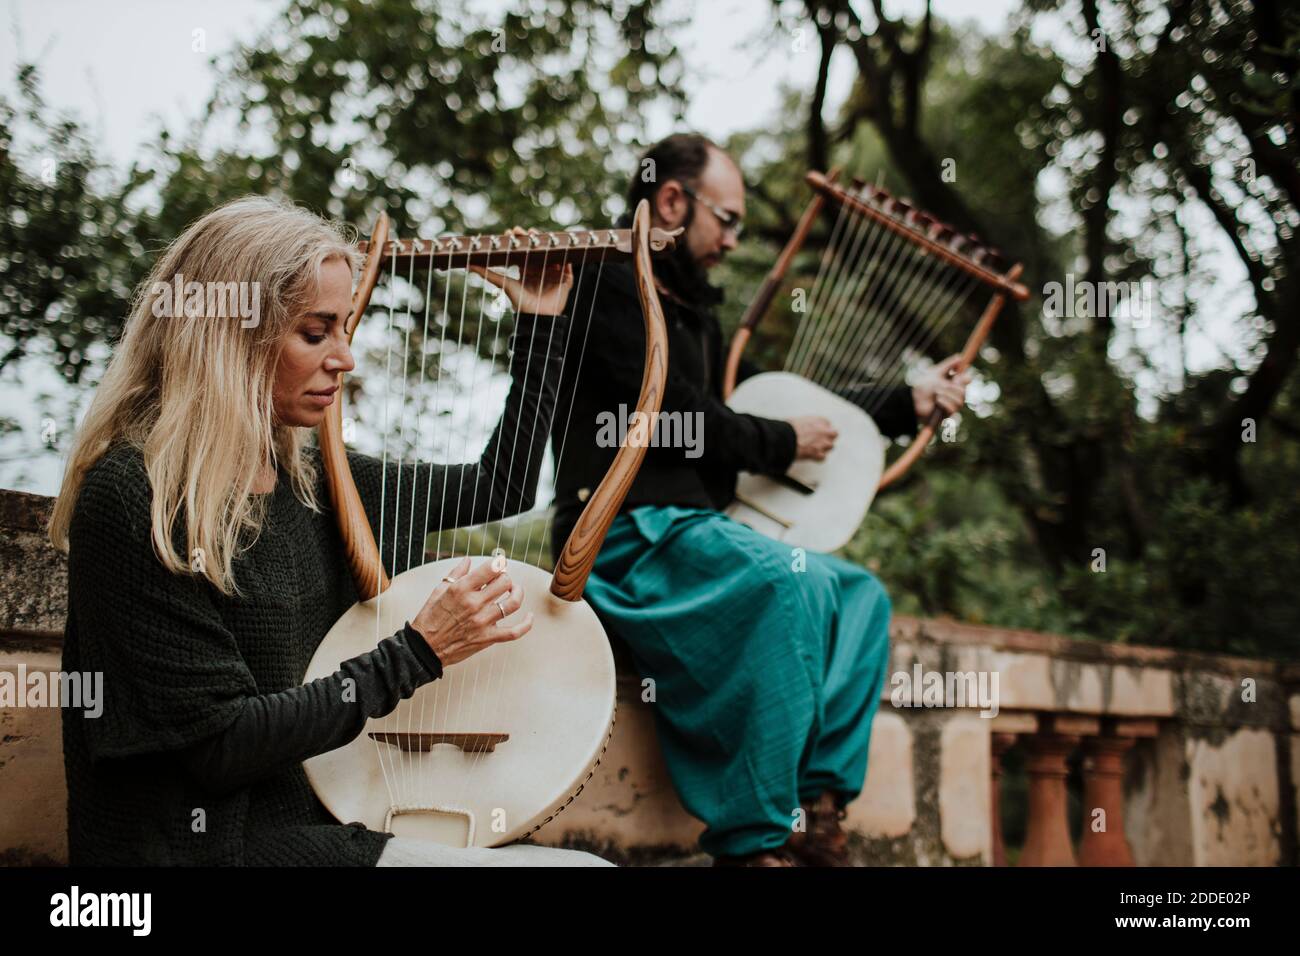 Female with male playing lyra musical instrument on bench Stock Photo